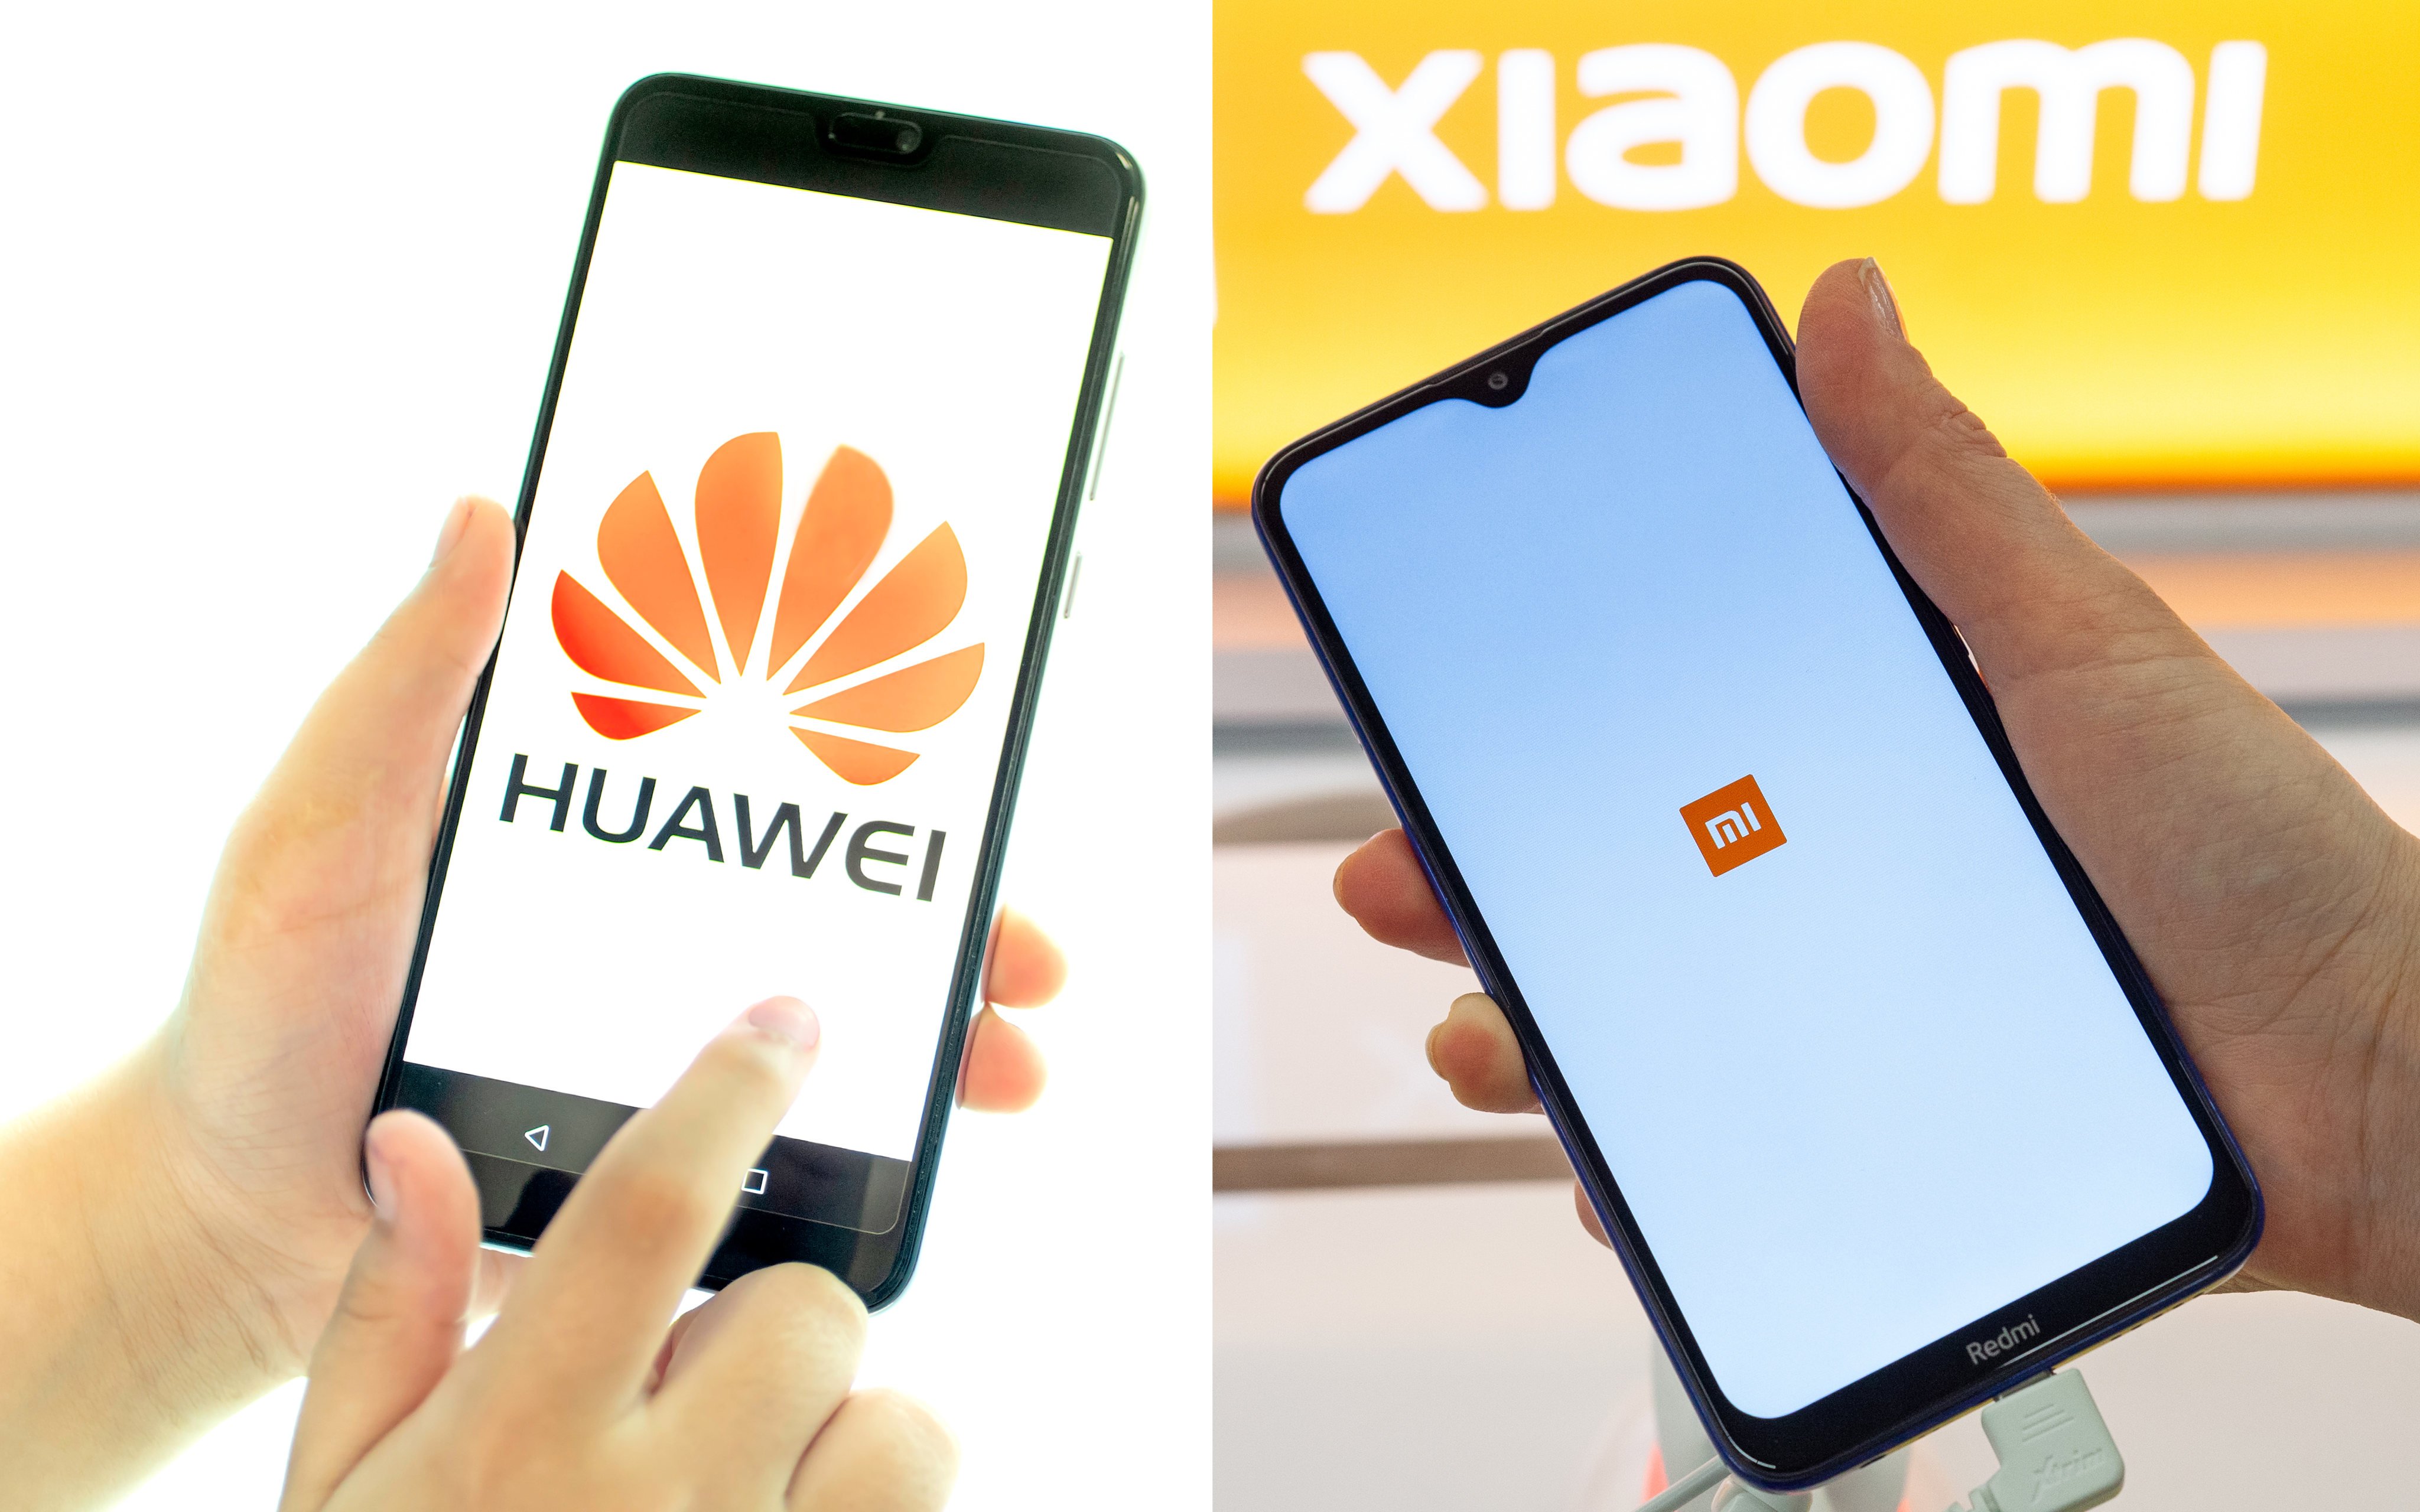 A global patent cross-licensing deal between Huawei Technologies and Xiaomi Corp underscores their sharpened focus to compete against Apple in the high-end segment of the smartphone market. Photos: Shutterstock